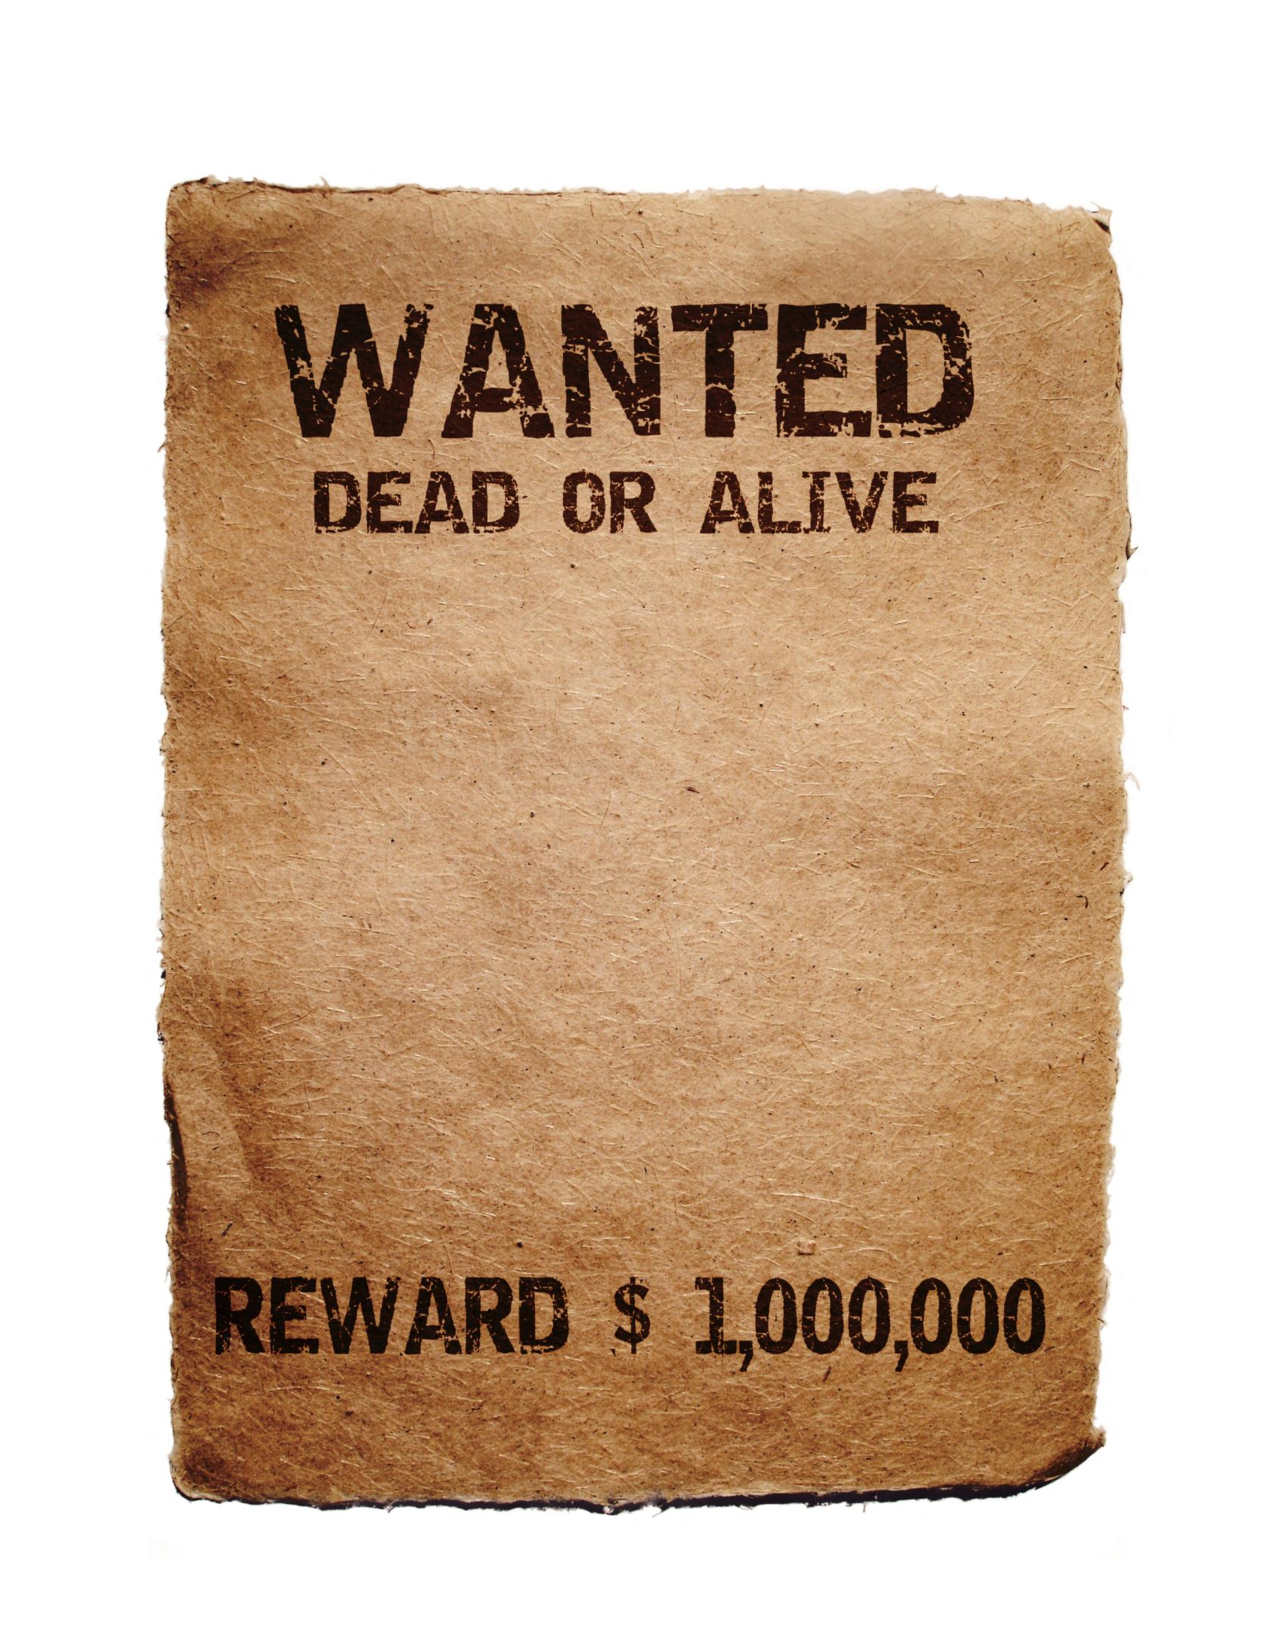 7-best-images-of-printable-wanted-poster-blank-wanted-sign-template